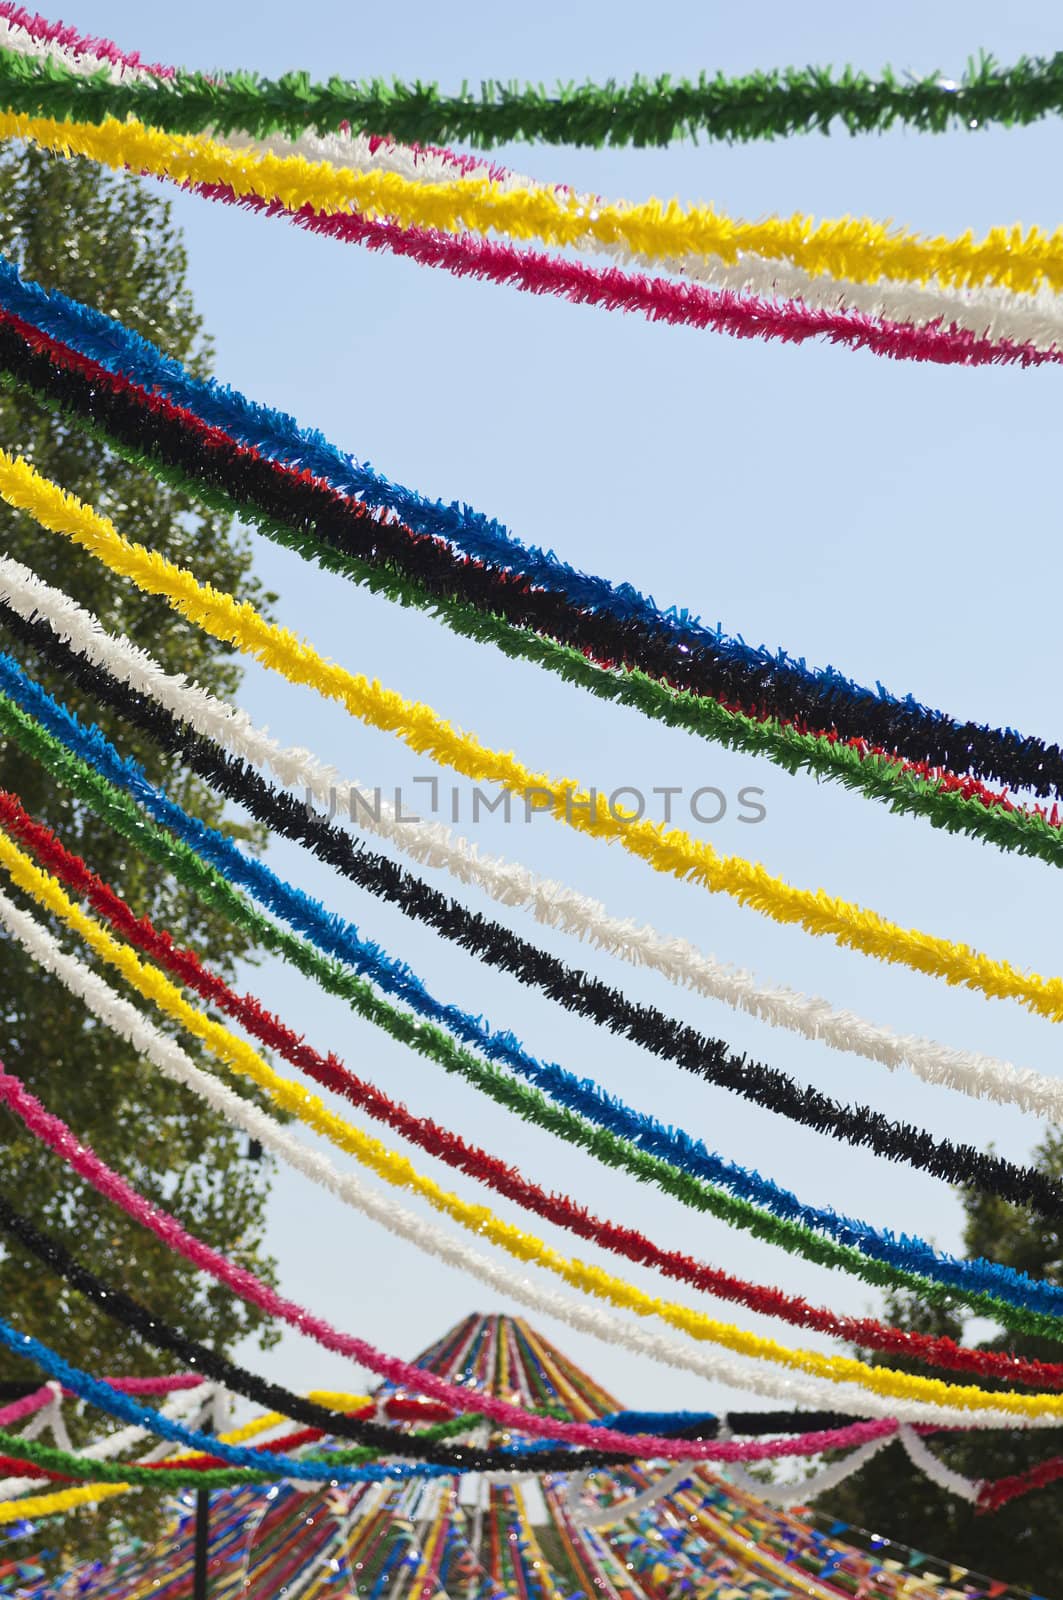 Detail of portuguese street traditional decorations in a summer festival, Alentejo, Portugal